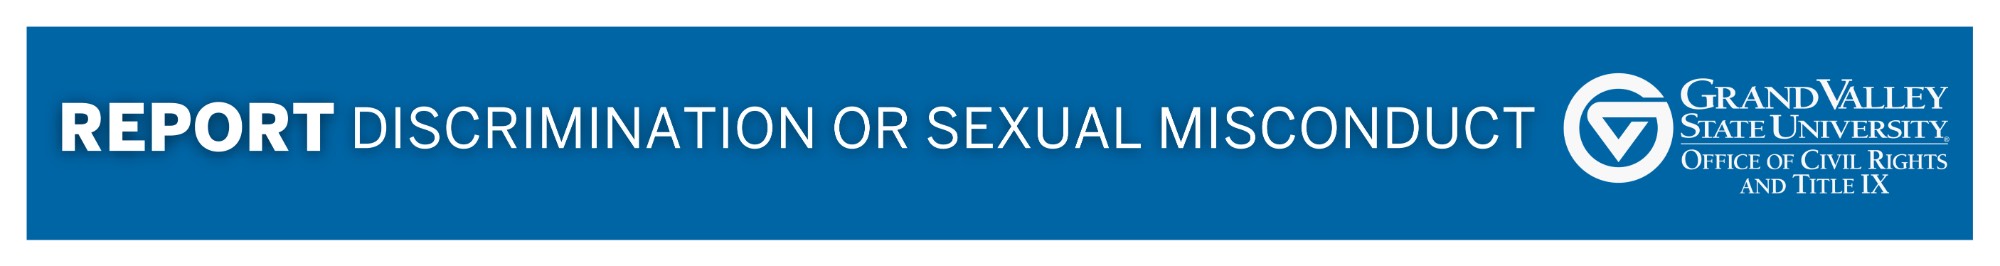 Report Discrimination or Sexual Misconduct